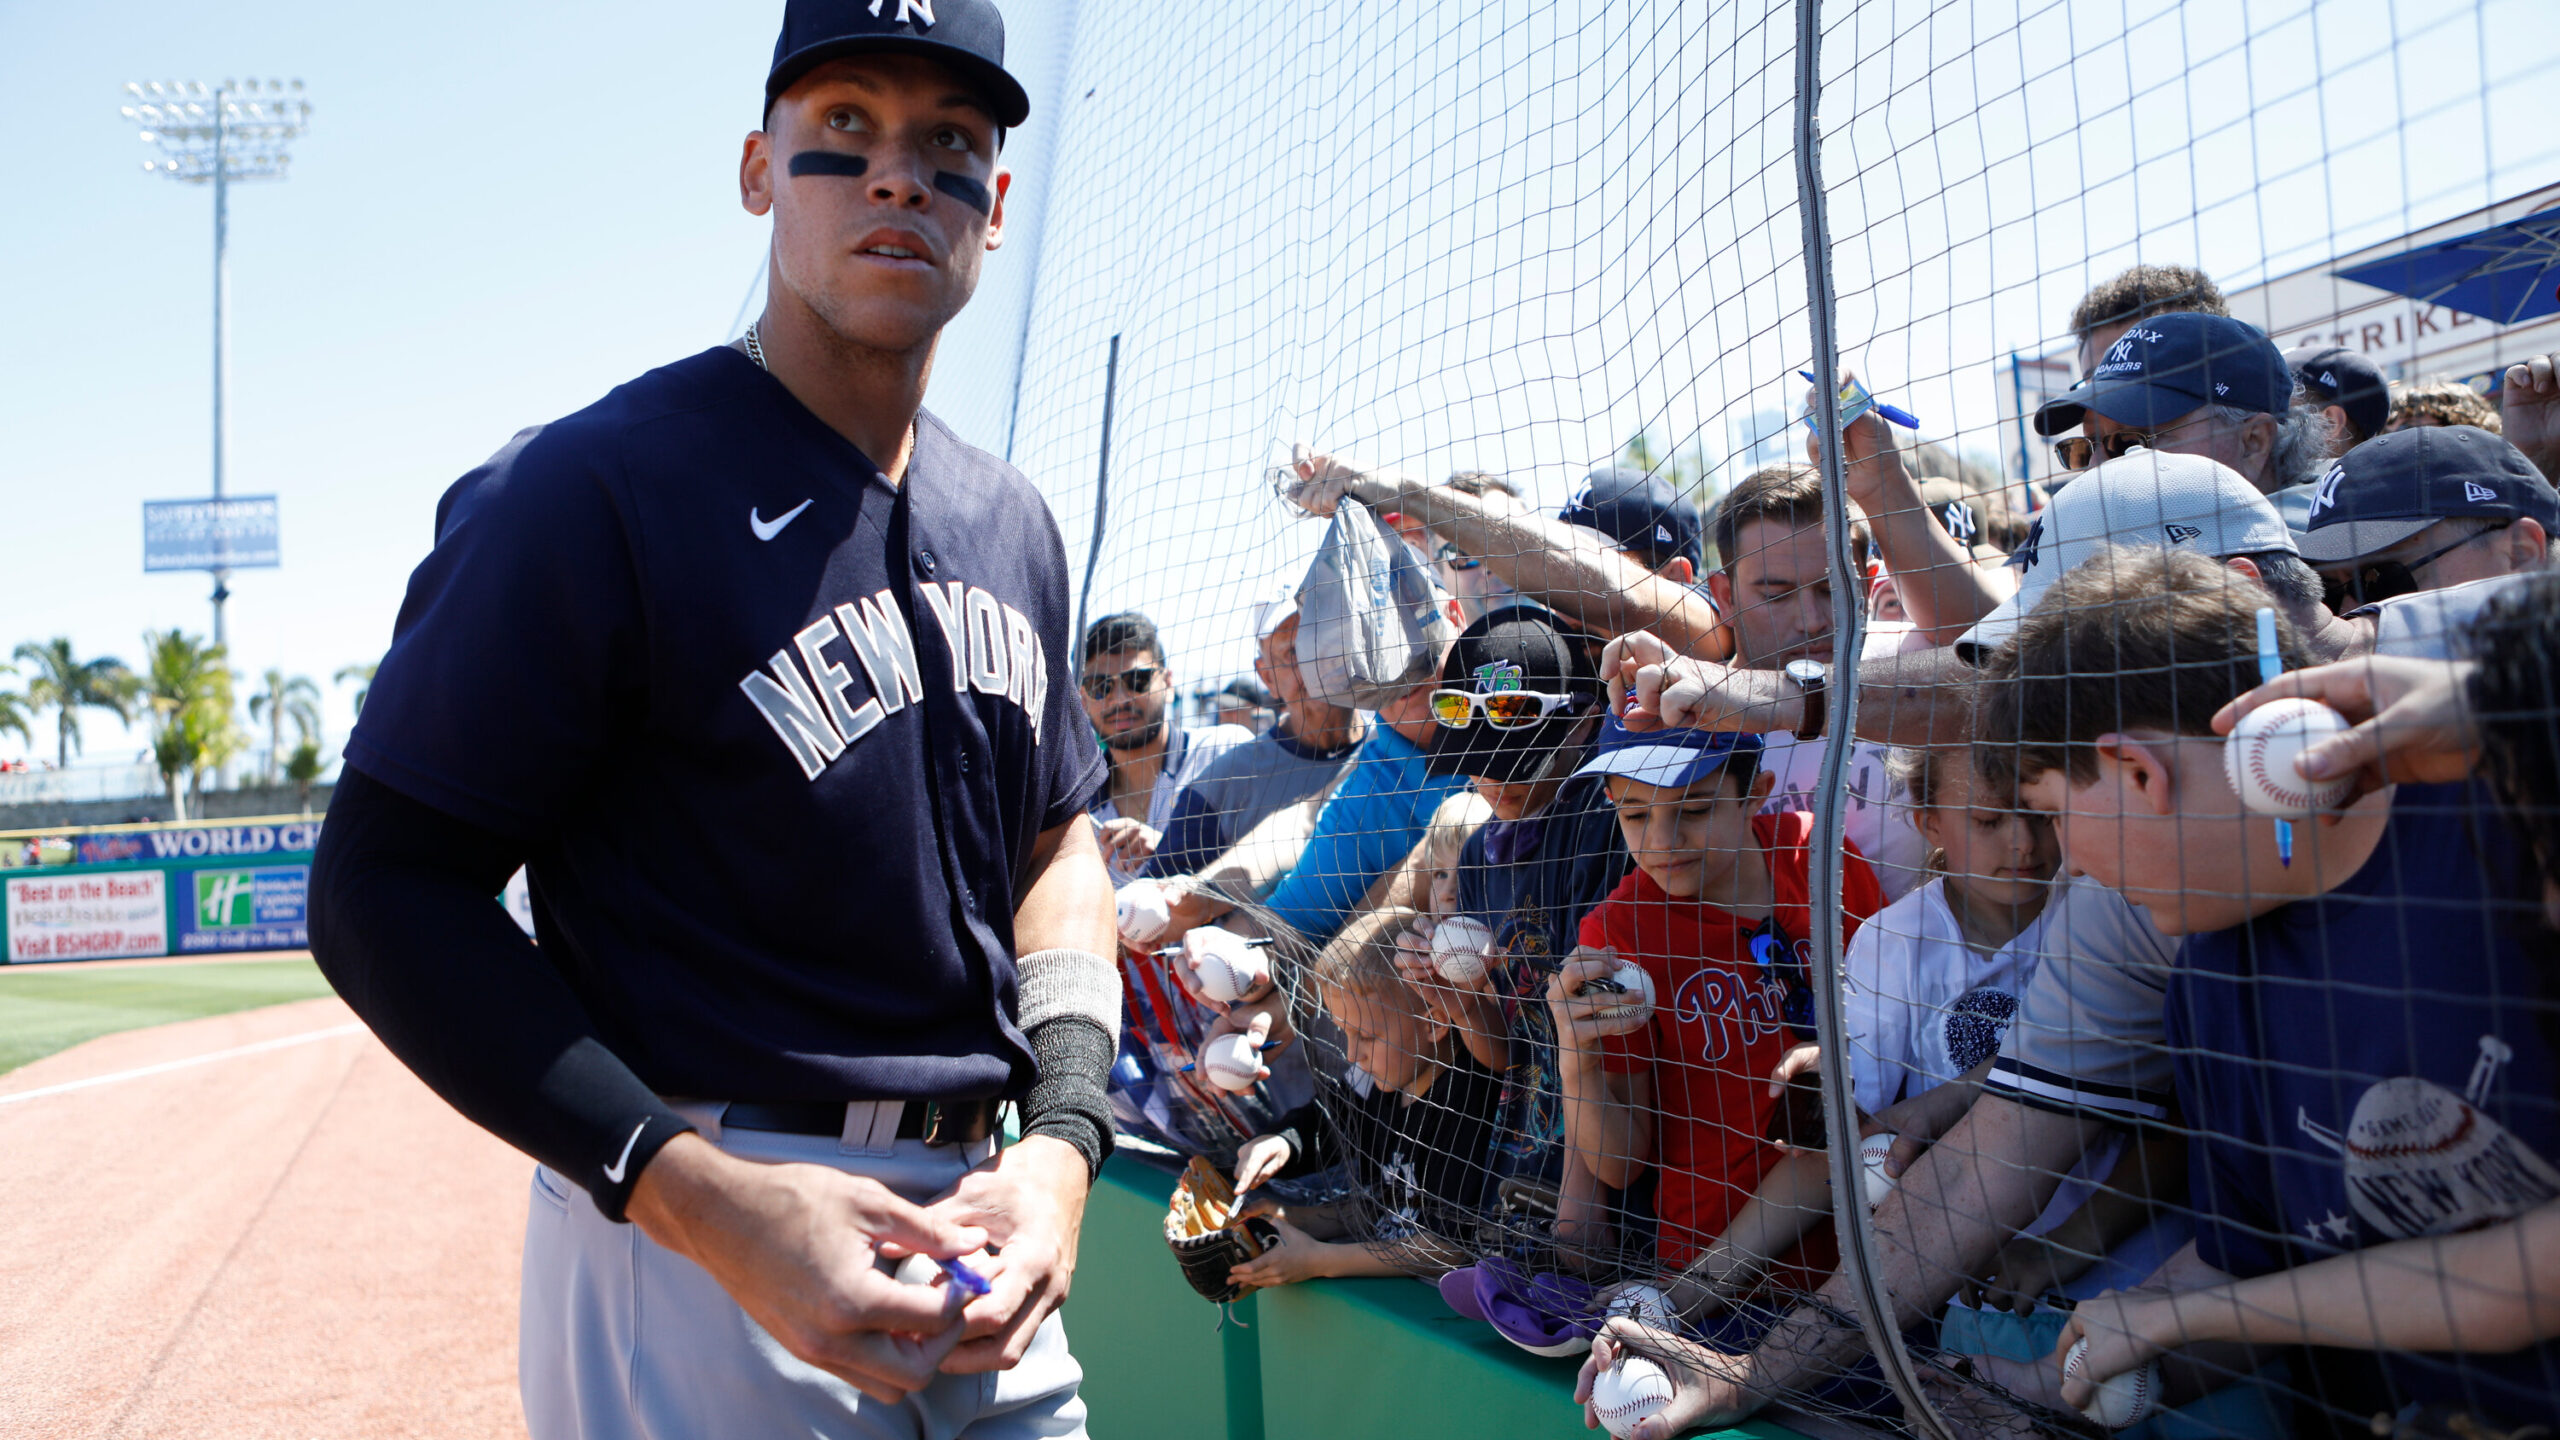 Aaron Judge On Verge of Record $360M Deal With Yankees